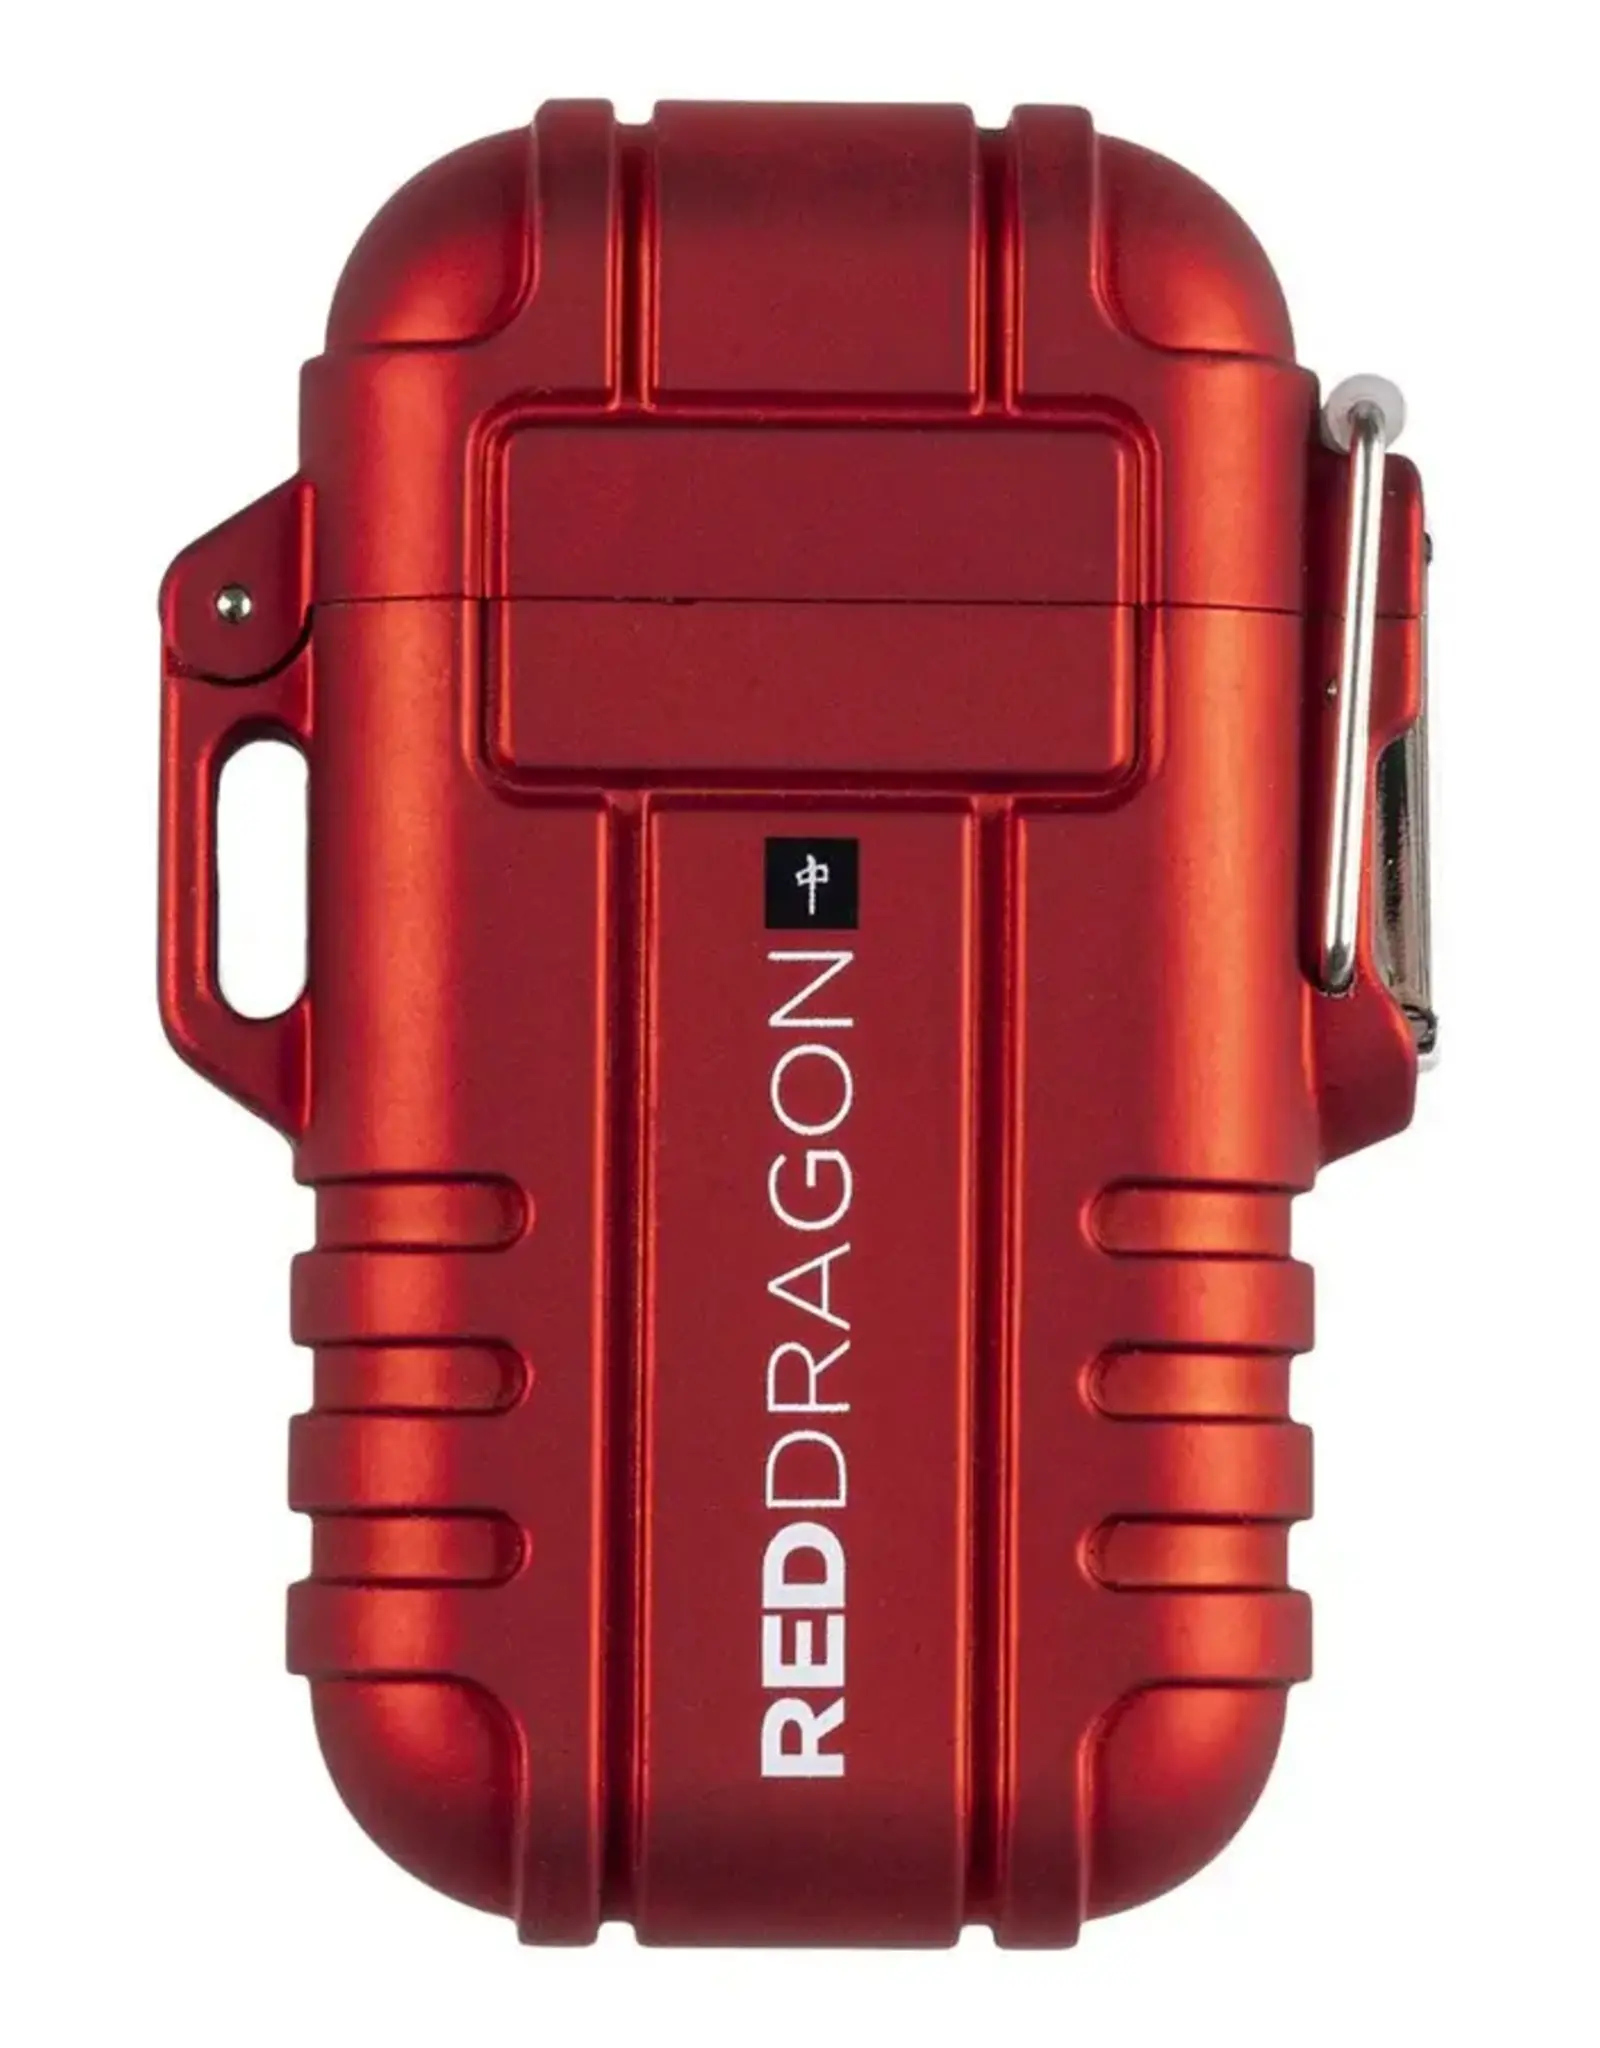 RDS RDS WINDPROOF ARC LIGHTER RED